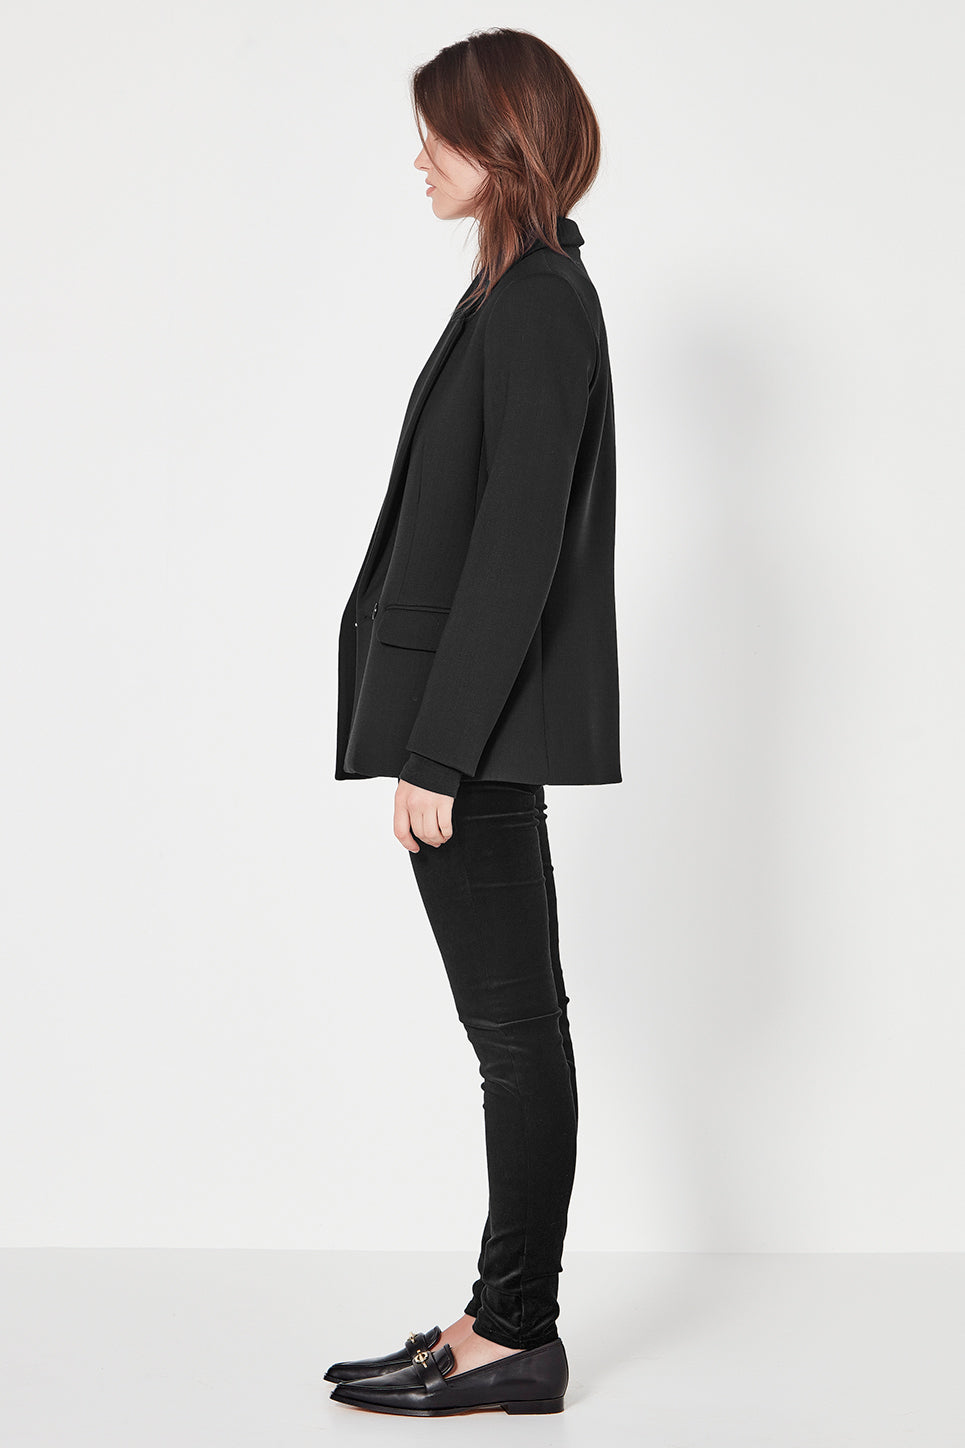 The Whitman Jacket in Black